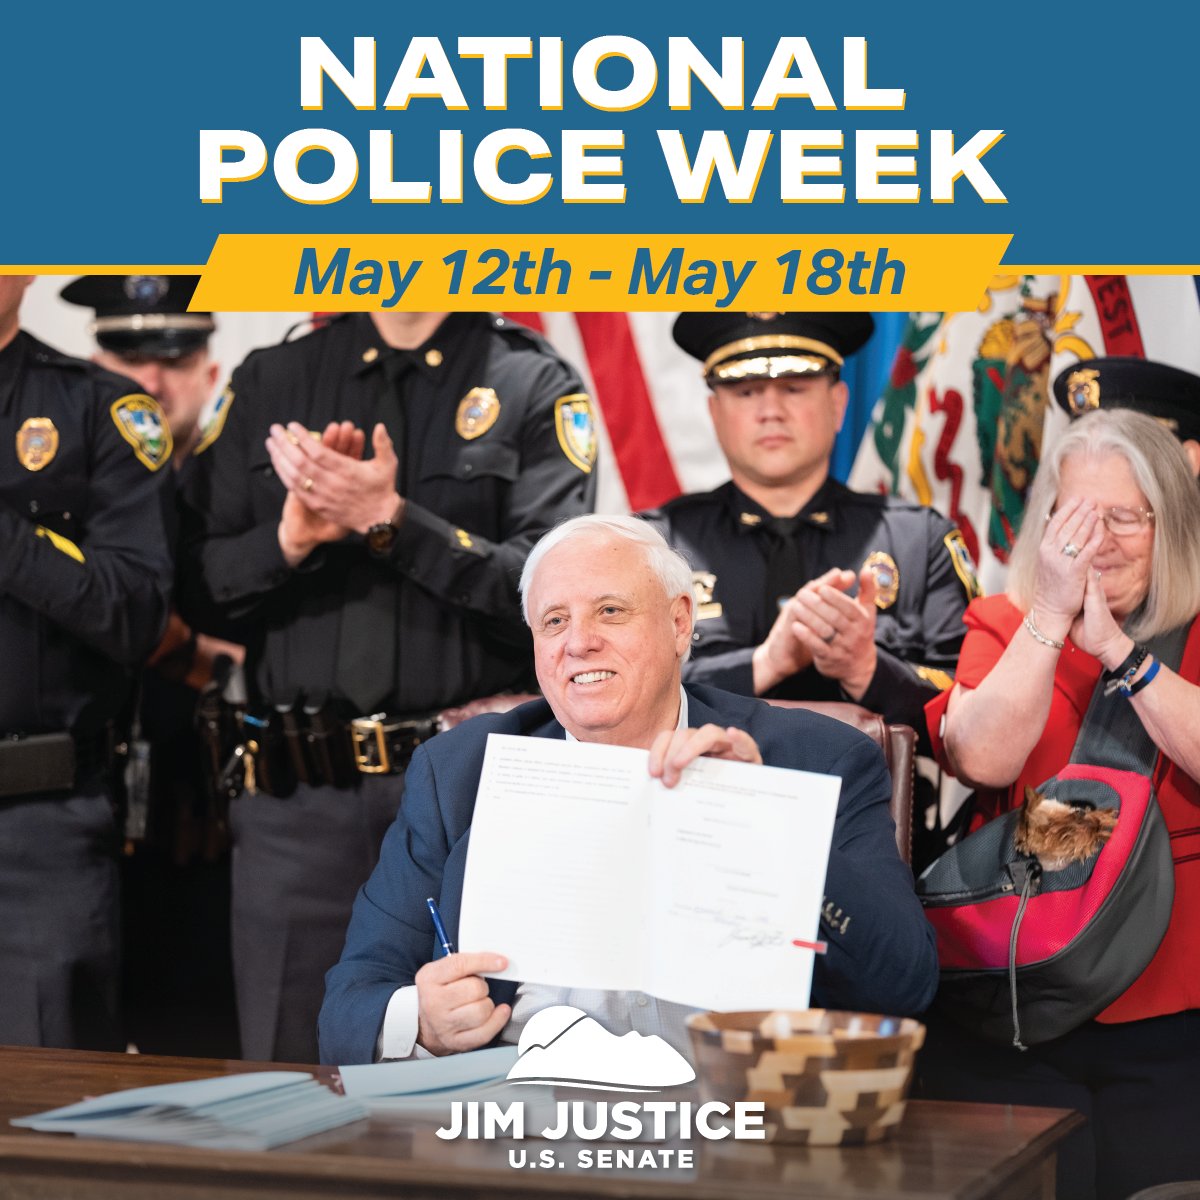 The brave men and women in law enforcement protect and serve in order to keep our communities safe. On this national police week, may we all take a moment to thank these heroes. I will always Back the Blue!